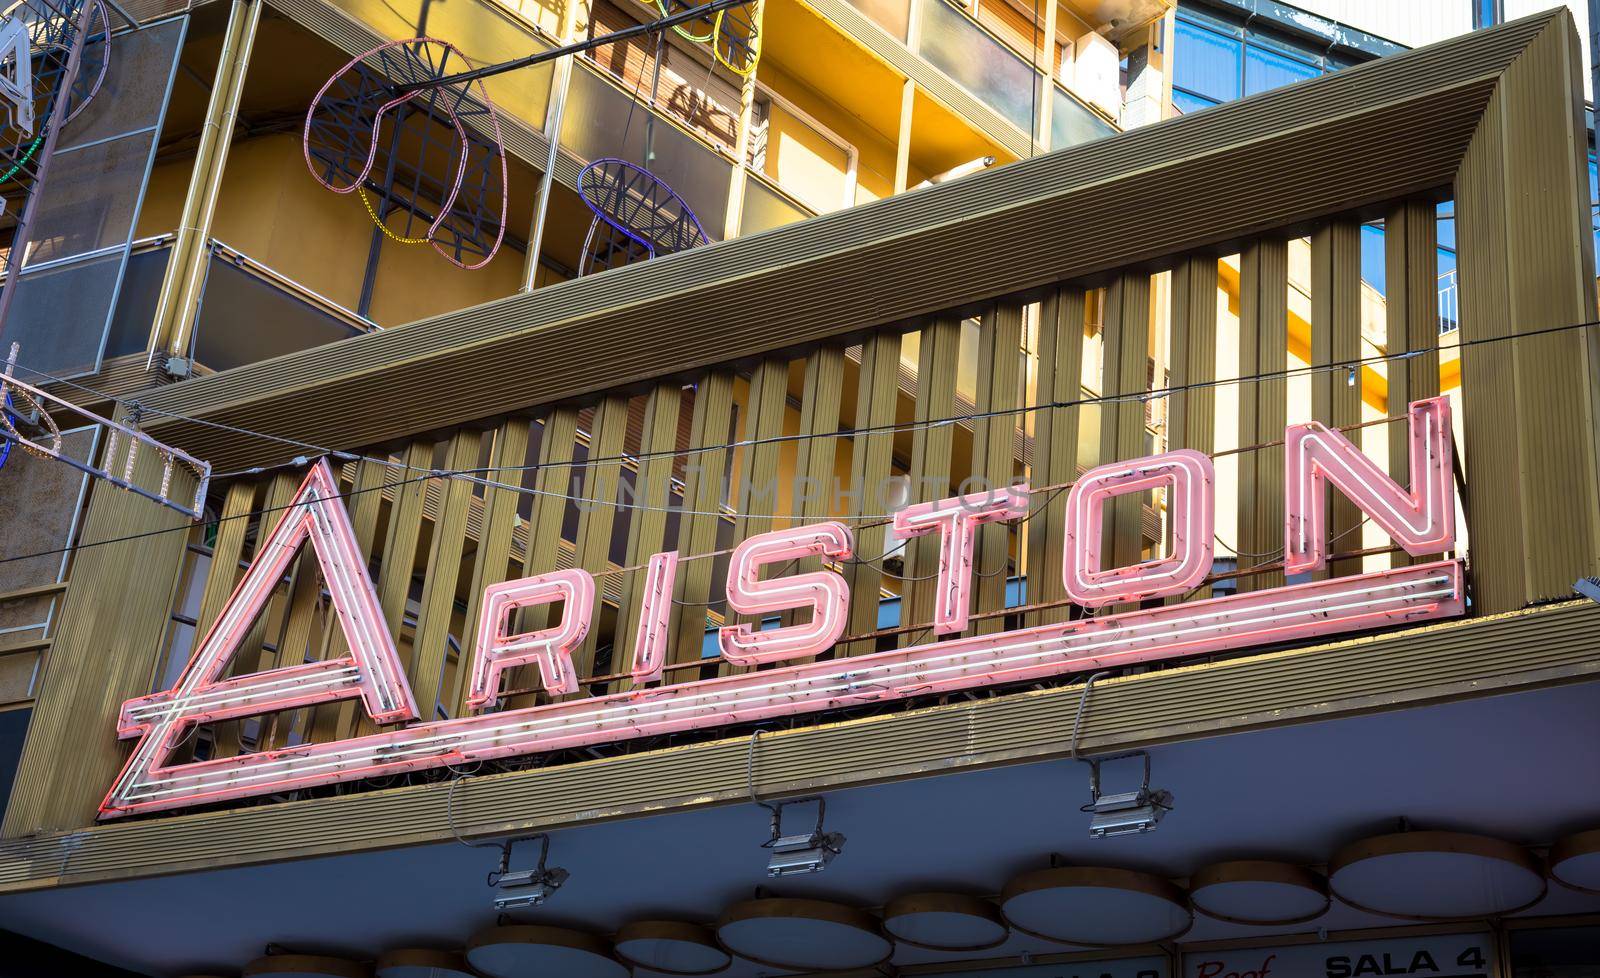 SANREMO, ITALY - CIRCA AUGUST 2020: view of the Sanremo Ariston theatre with detail of the name. This is the famous song festival location.